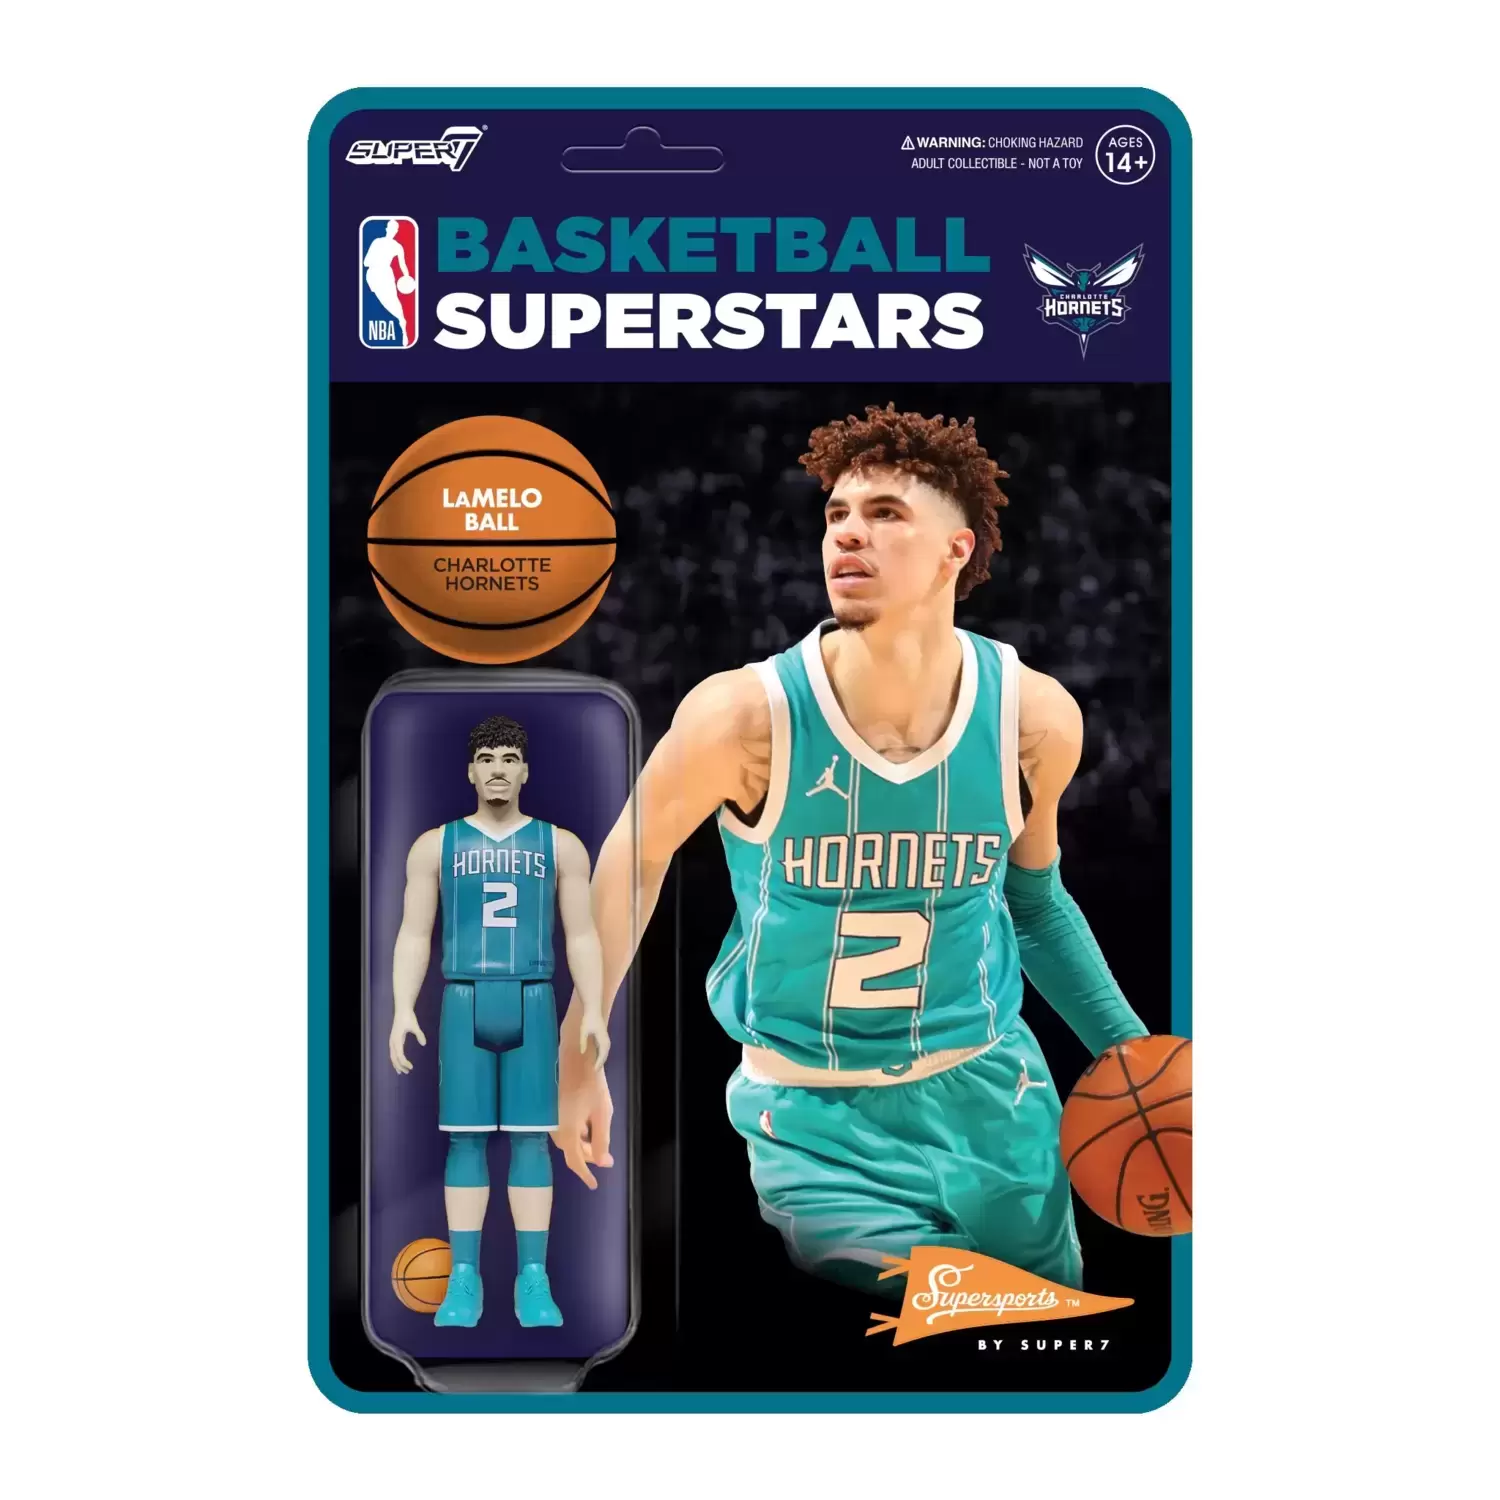 Supersports by Super7 - Basketball - LaMelo Ball (Hornets)